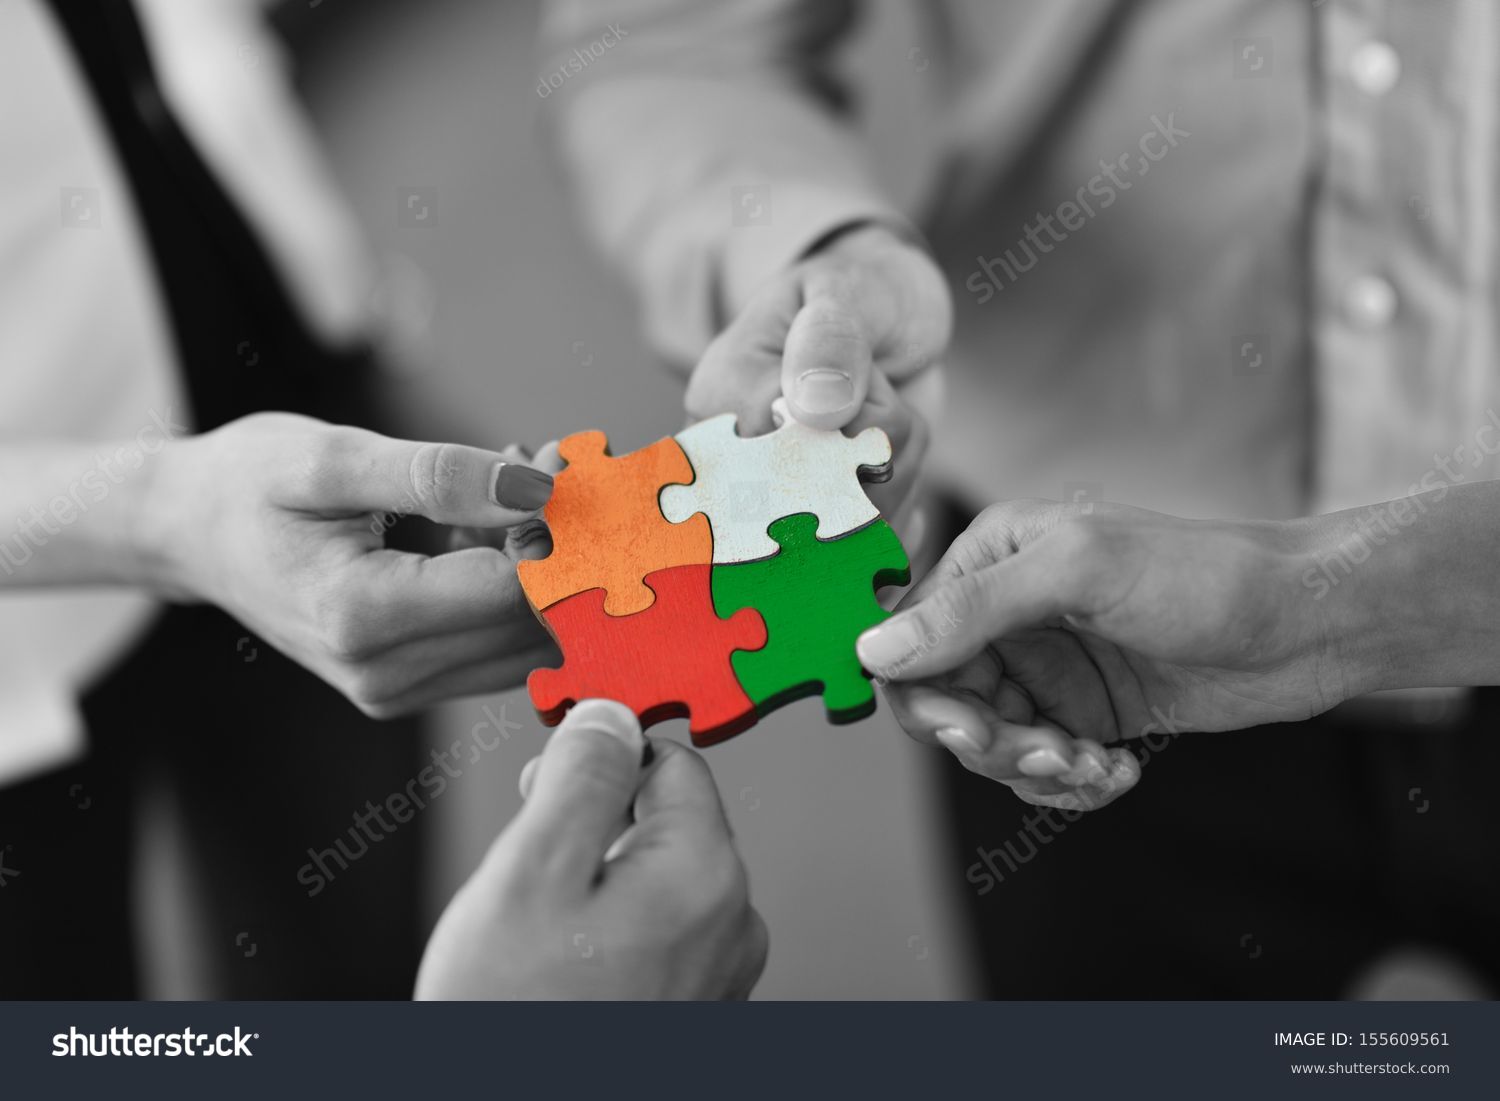 Group of business people assembling jigsaw puzzle and represent team support and help concept #155609561